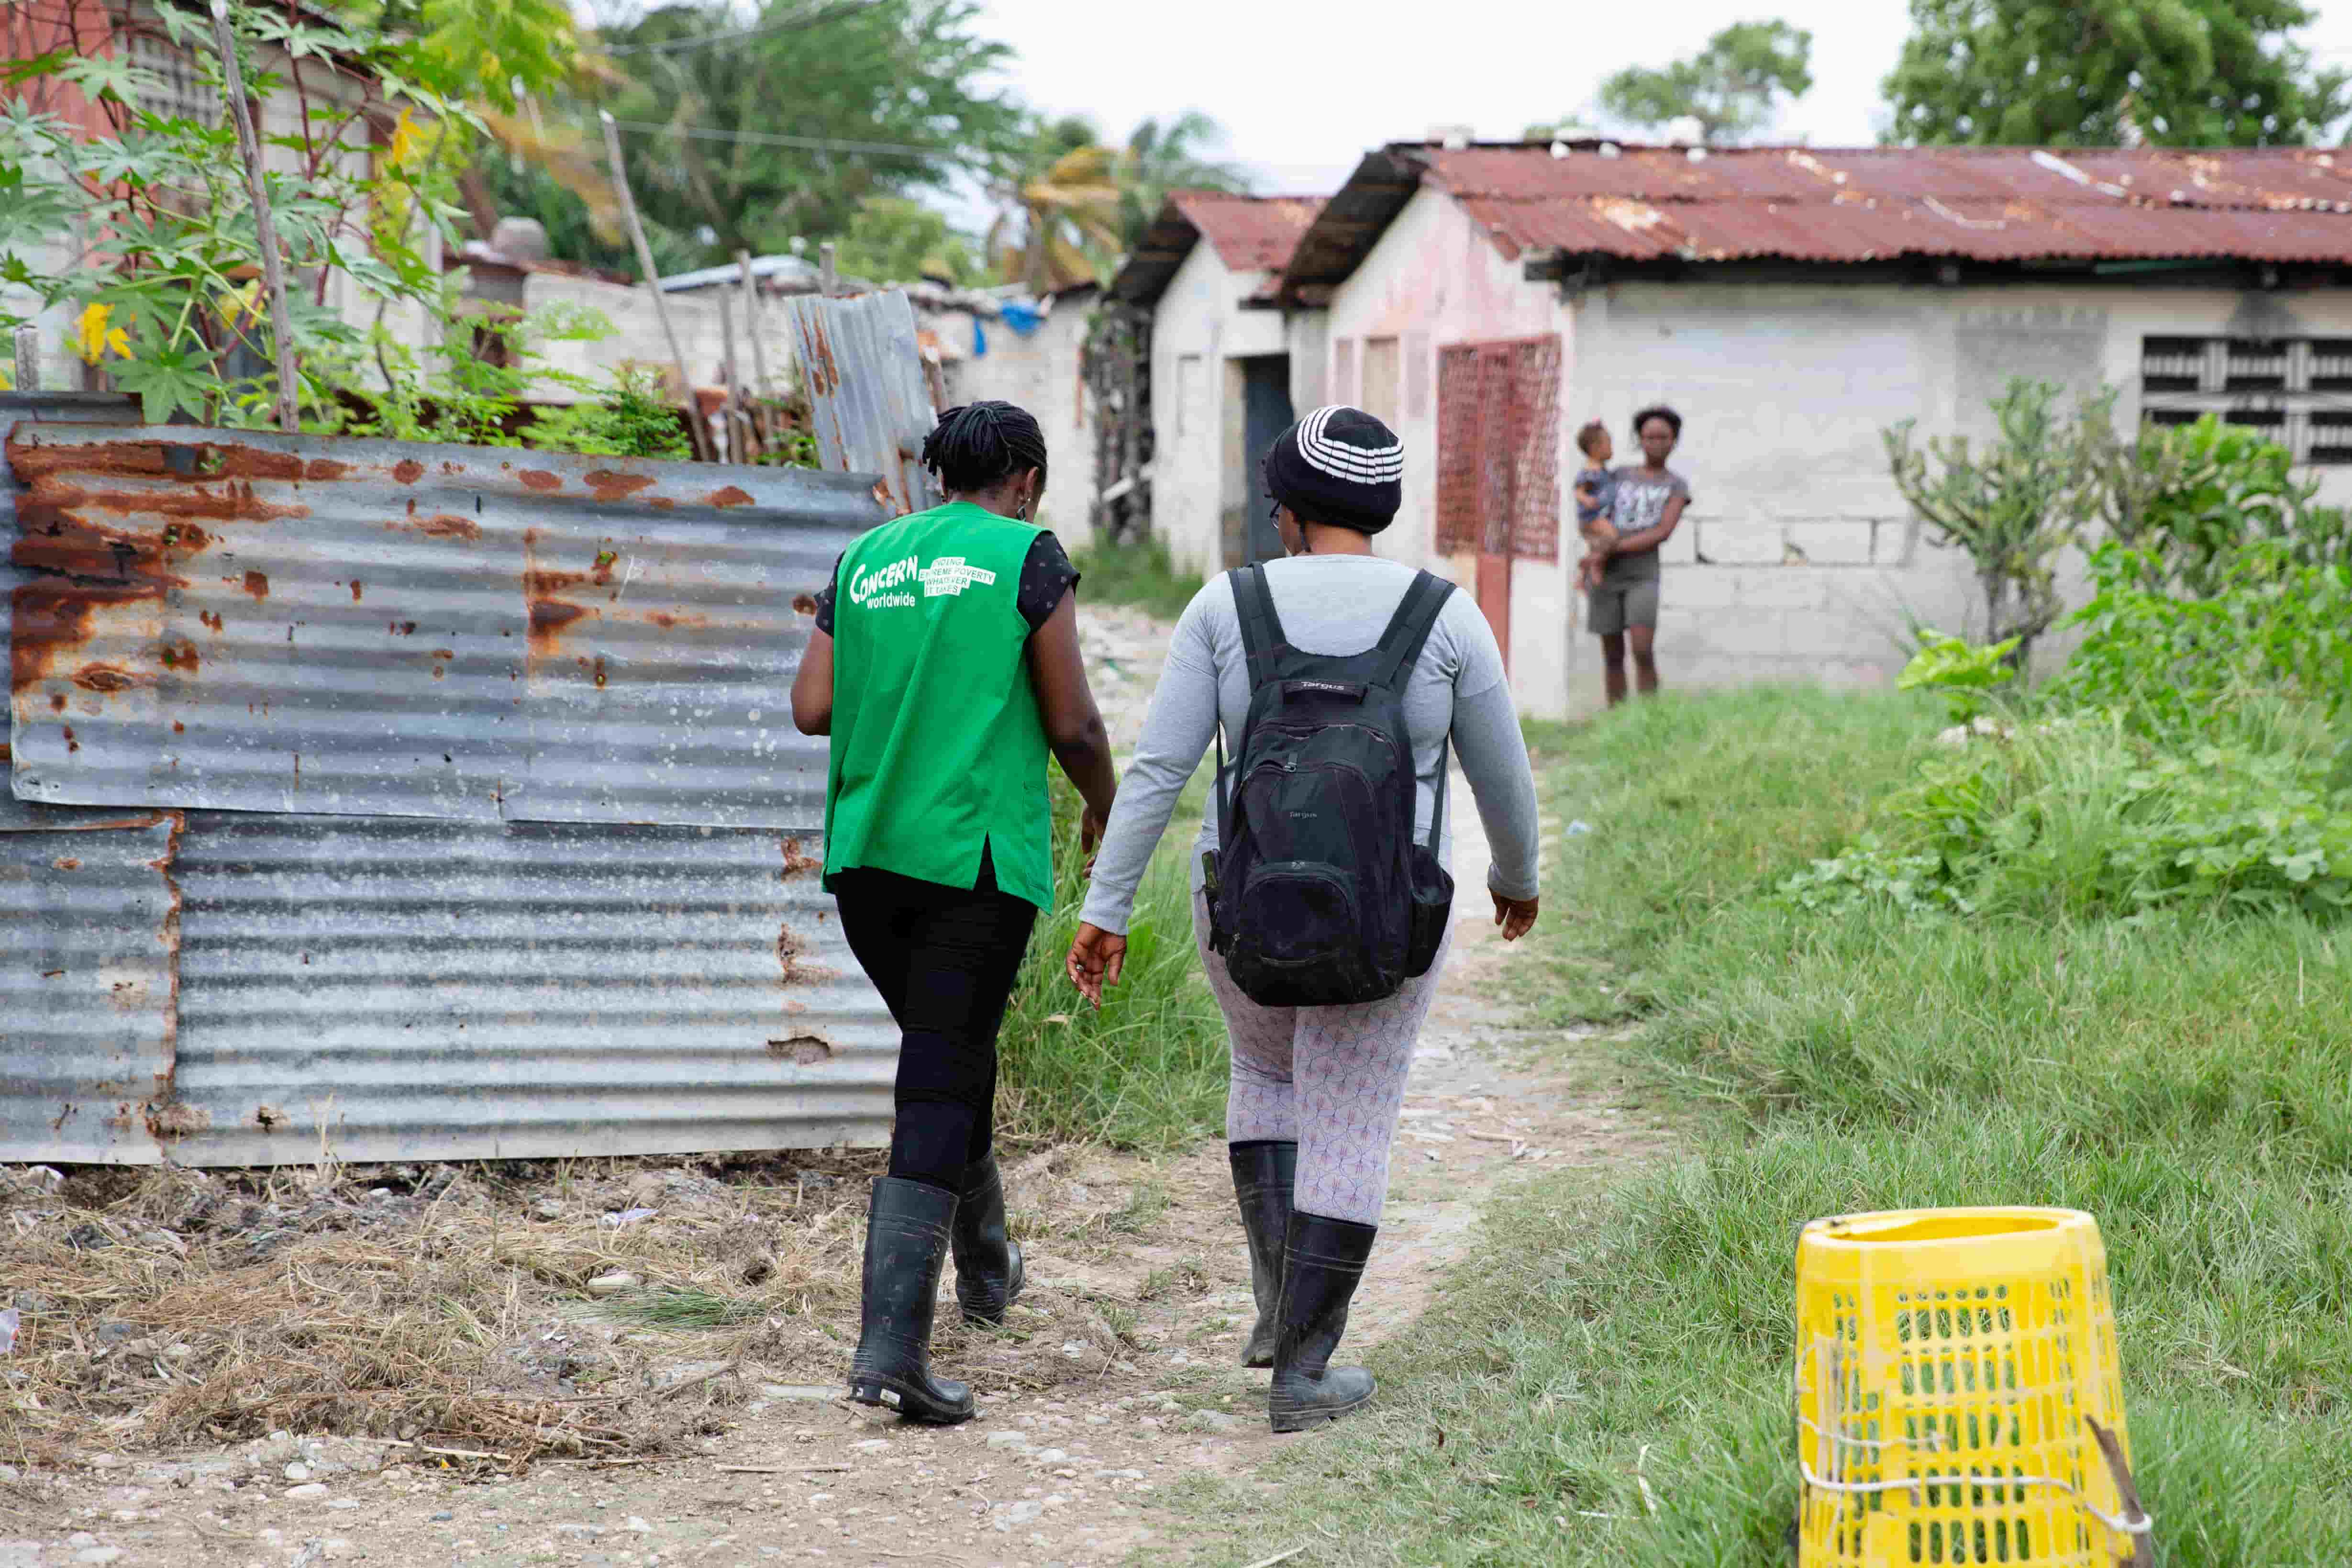 Concern staff and project participant walk on dirt path in Haiti.